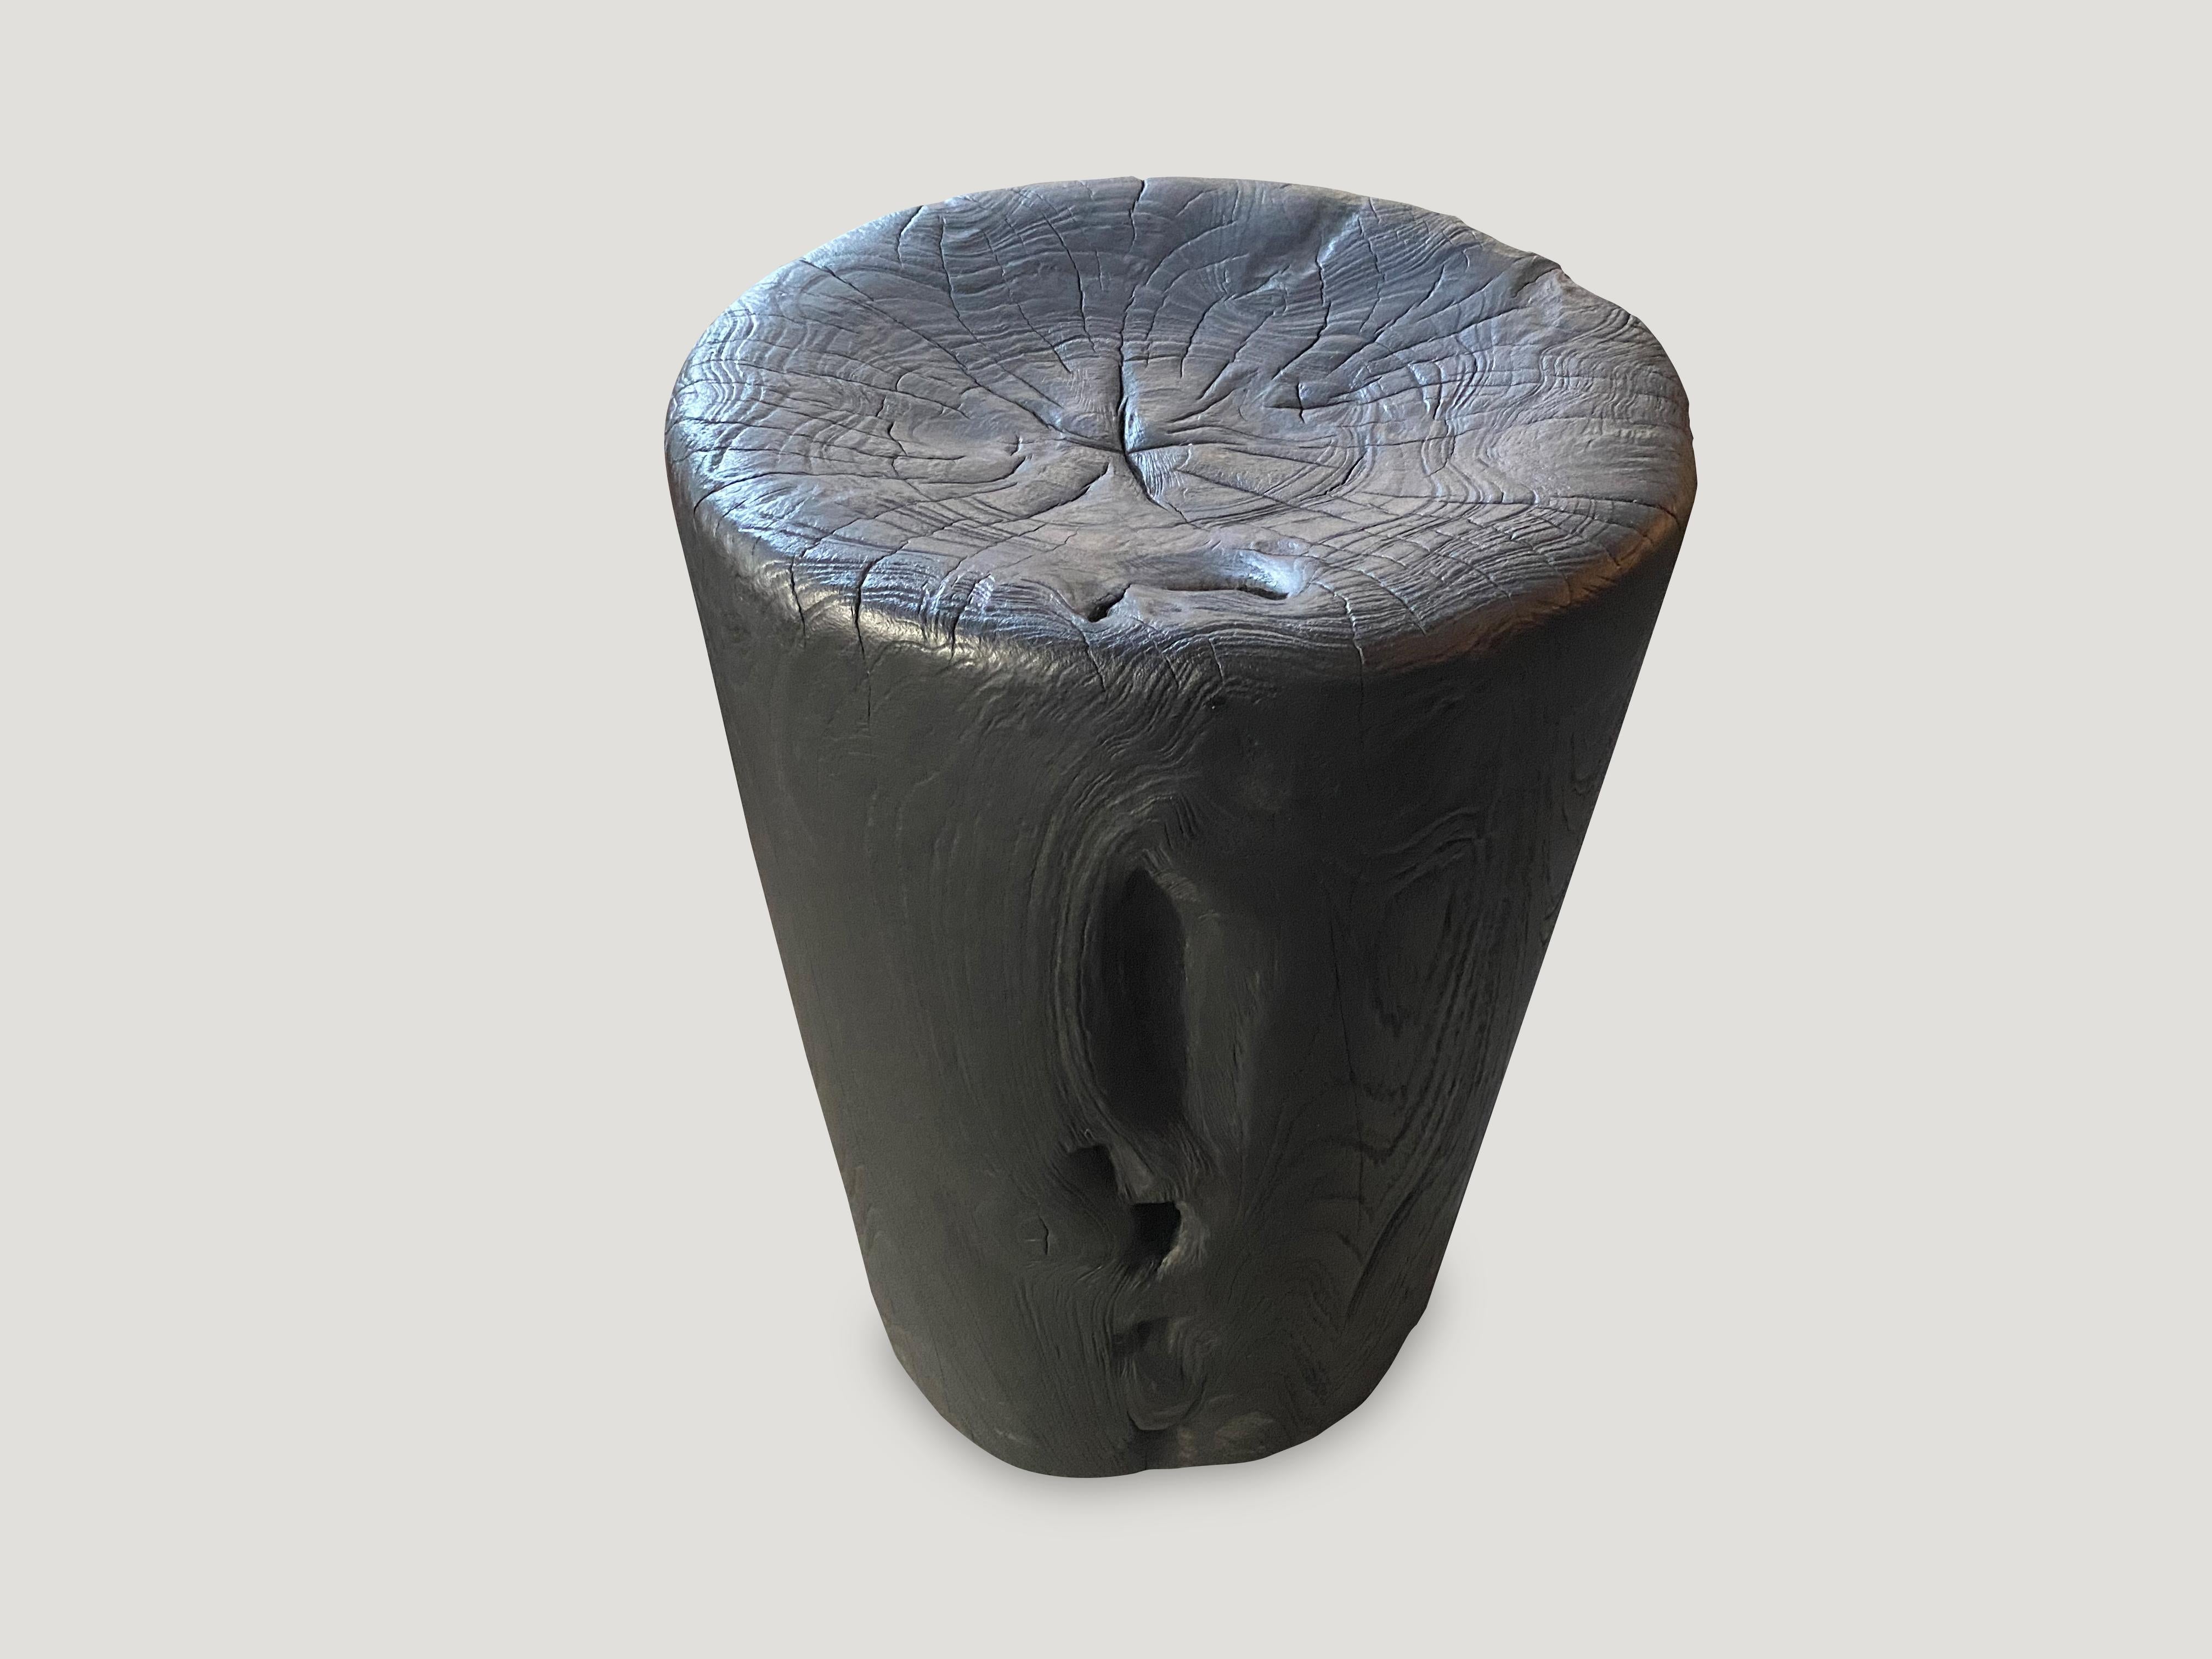 Reclaimed teak wood side table or stool. Hand carved into a drum shape whilst respecting the natural organic wood. Burnt, sanded and sealed. We have a collection. All unique. The price represents the one shown. Also available bleached.

The Triple